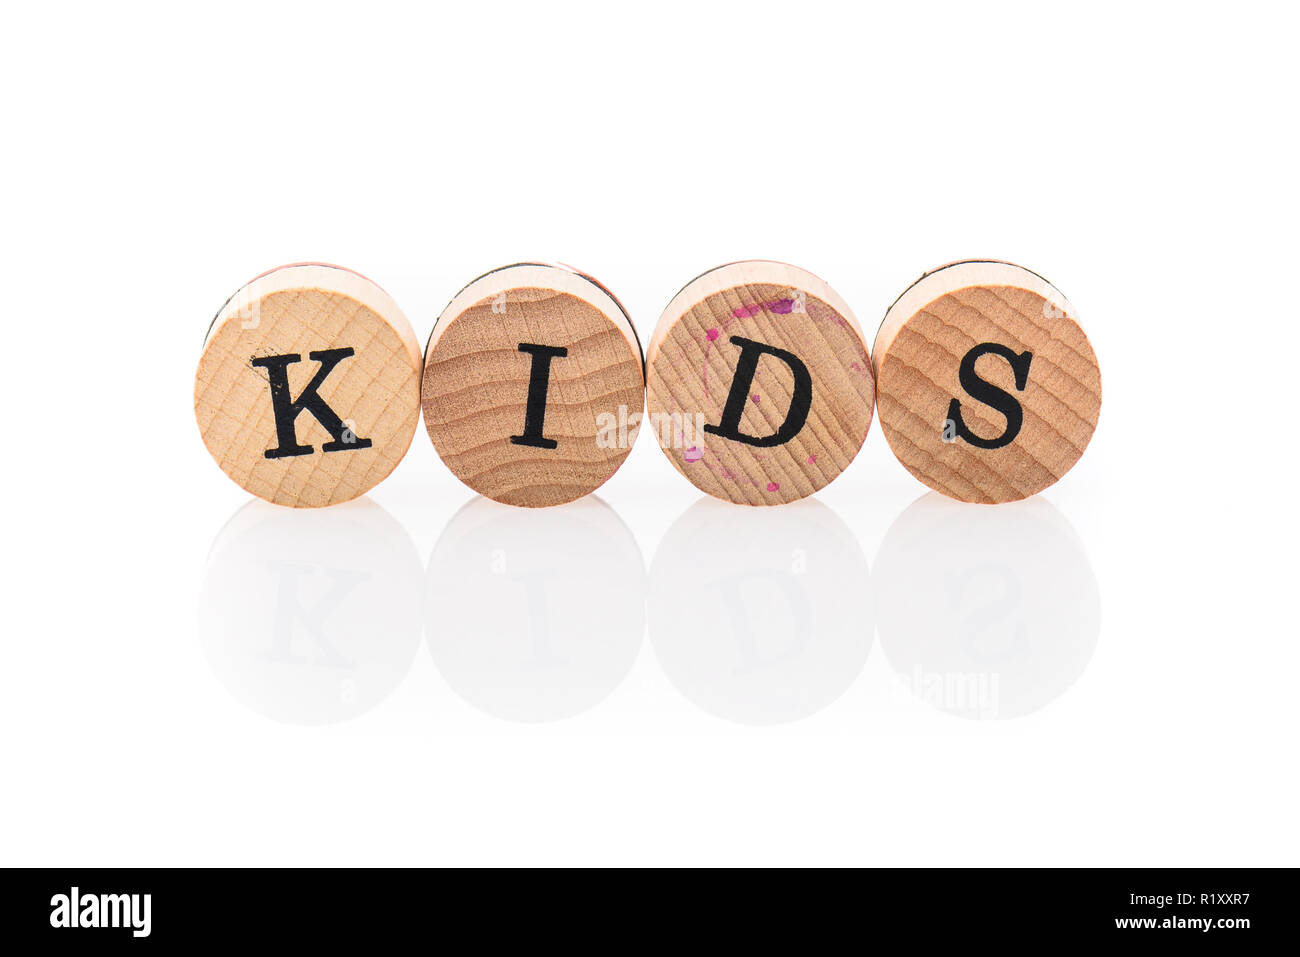 Word Kids from circular wooden tiles with letters children toy. Concept of family spelled in children toy letters. Stock Photo